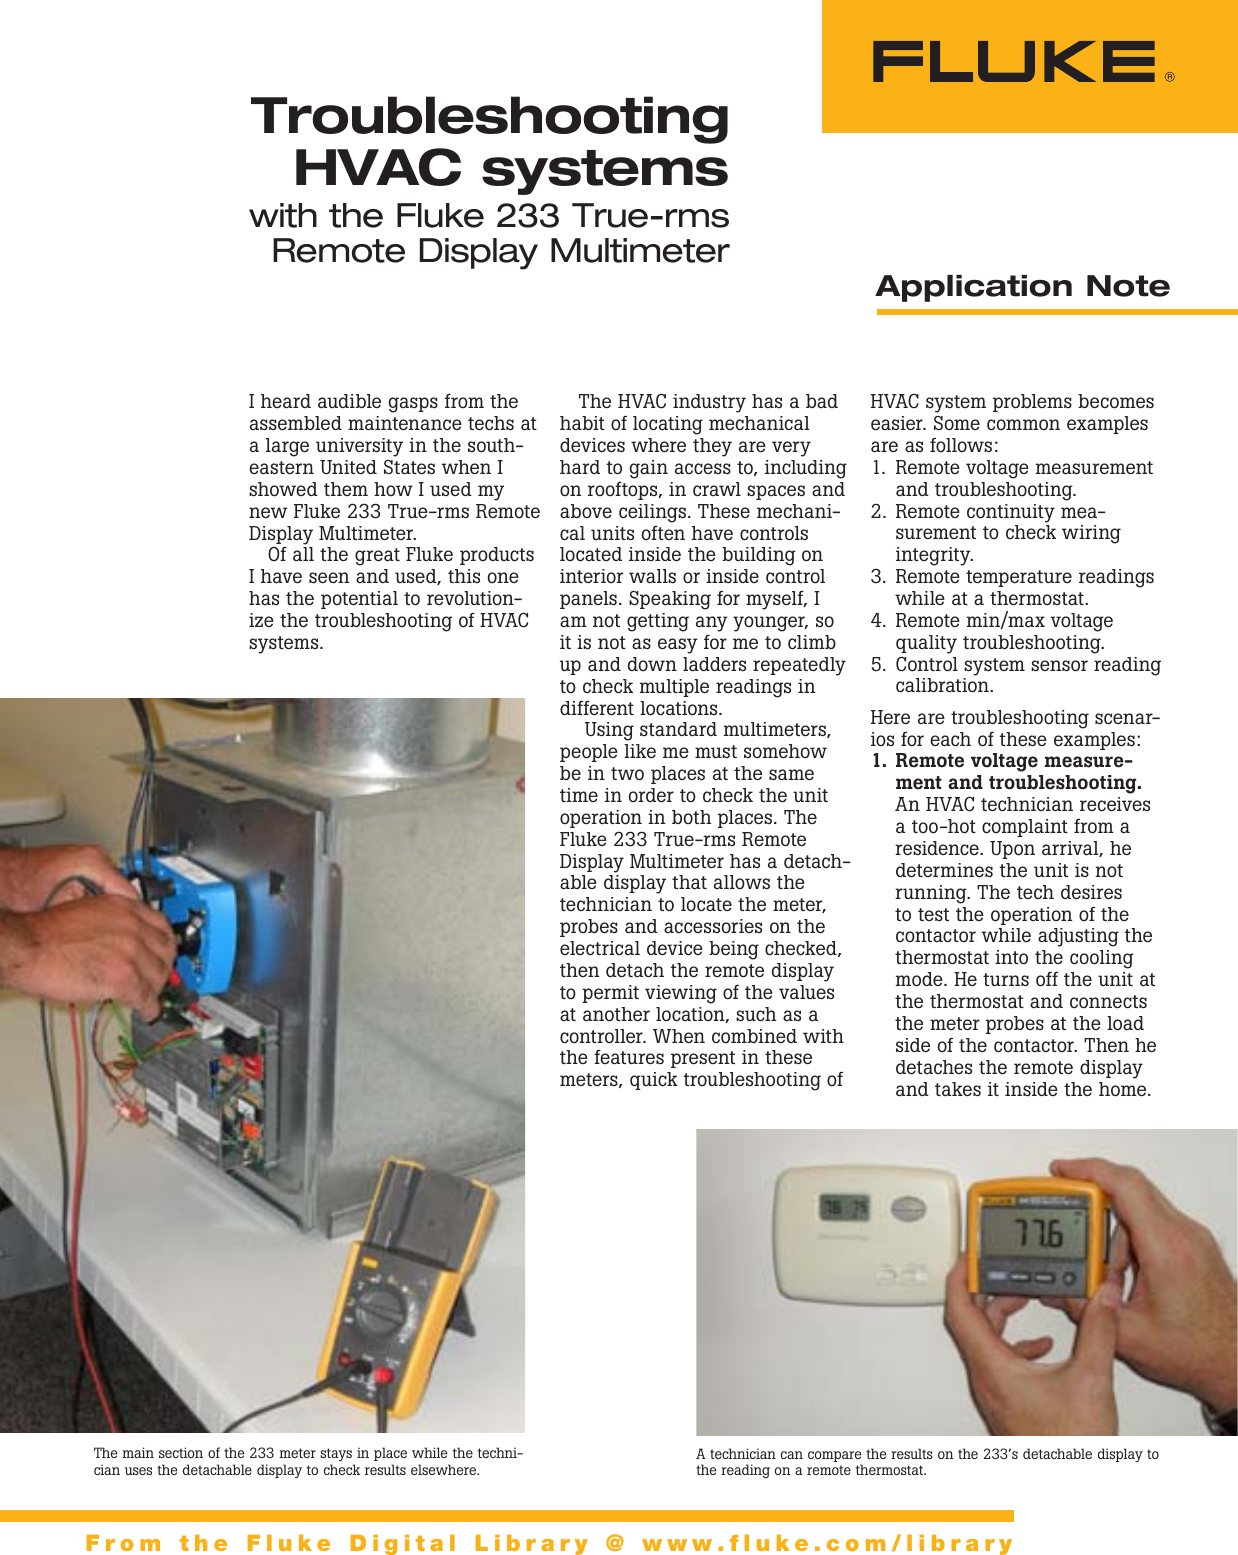 Page 1 of 2 - Fluke Fluke-233-Application-Note- Troubleshooting HVAC Systemswith The 233 True-rms Remote Display Multimeter  Fluke-233-application-note